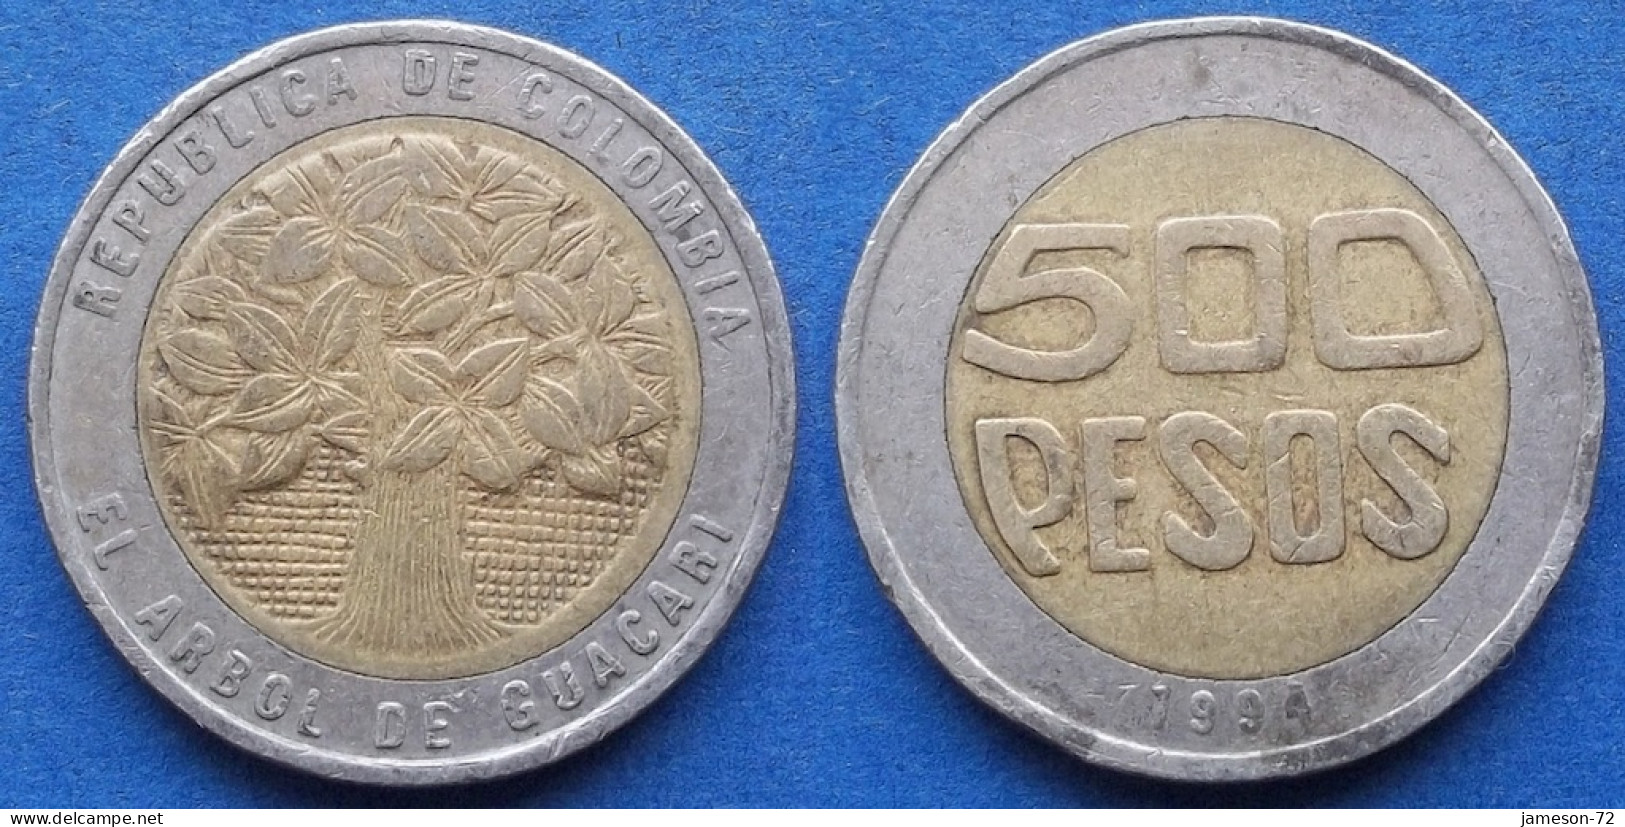 COLOMBIA - 500 Pesos 1994 "Guacari Tree" KM# 286 Republic - Edelweiss Coins - Colombie